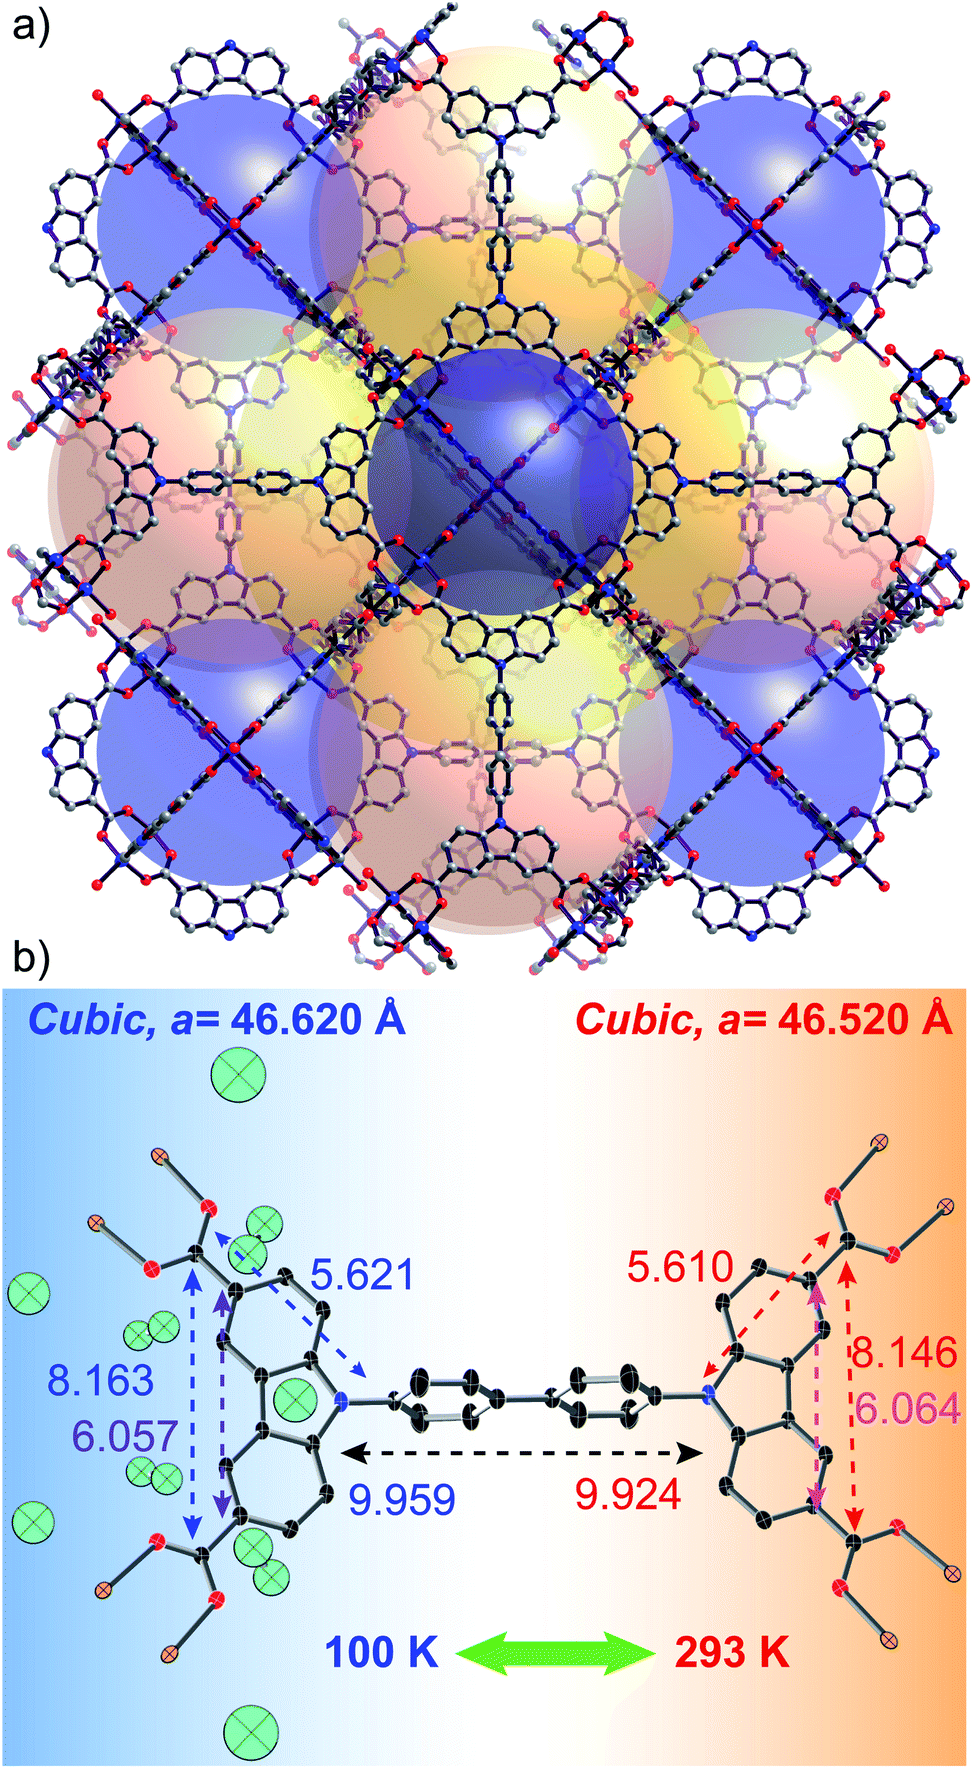 Reversible Switching Between Positive And Negative Thermal Expansion In A Metal Organic Framework Dut 49 Journal Of Materials Chemistry A Rsc Publishing Doi 10 1039 D0ta060f